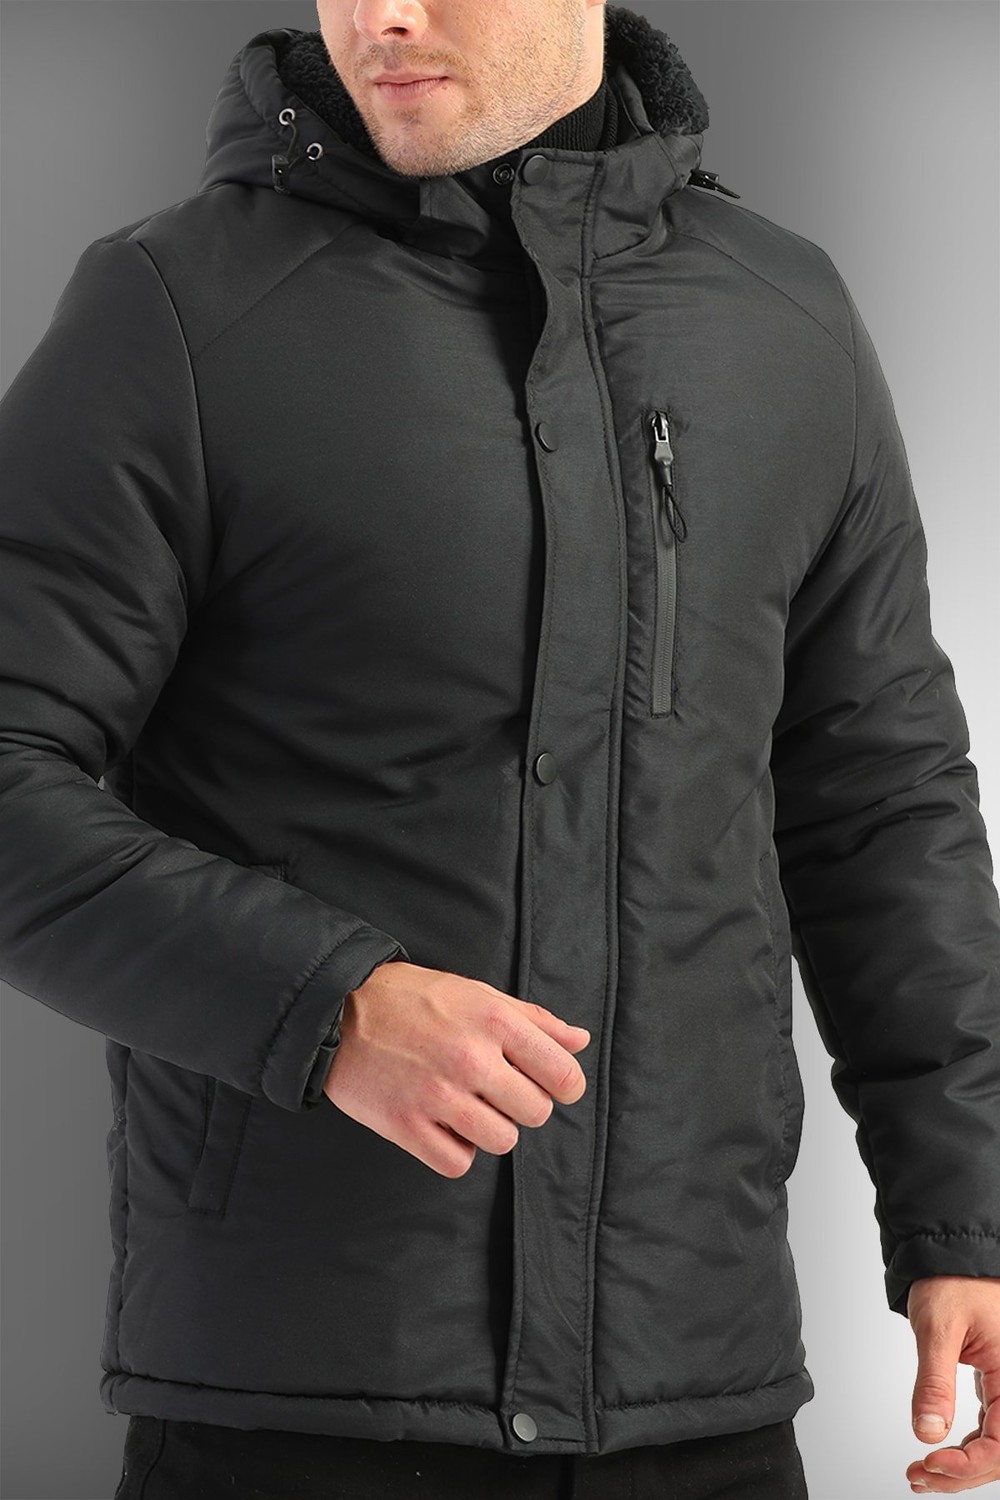 D1fference Men's Black Fleece Quilted Hooded Water And Windproof Sports Winter Coat & Parka.